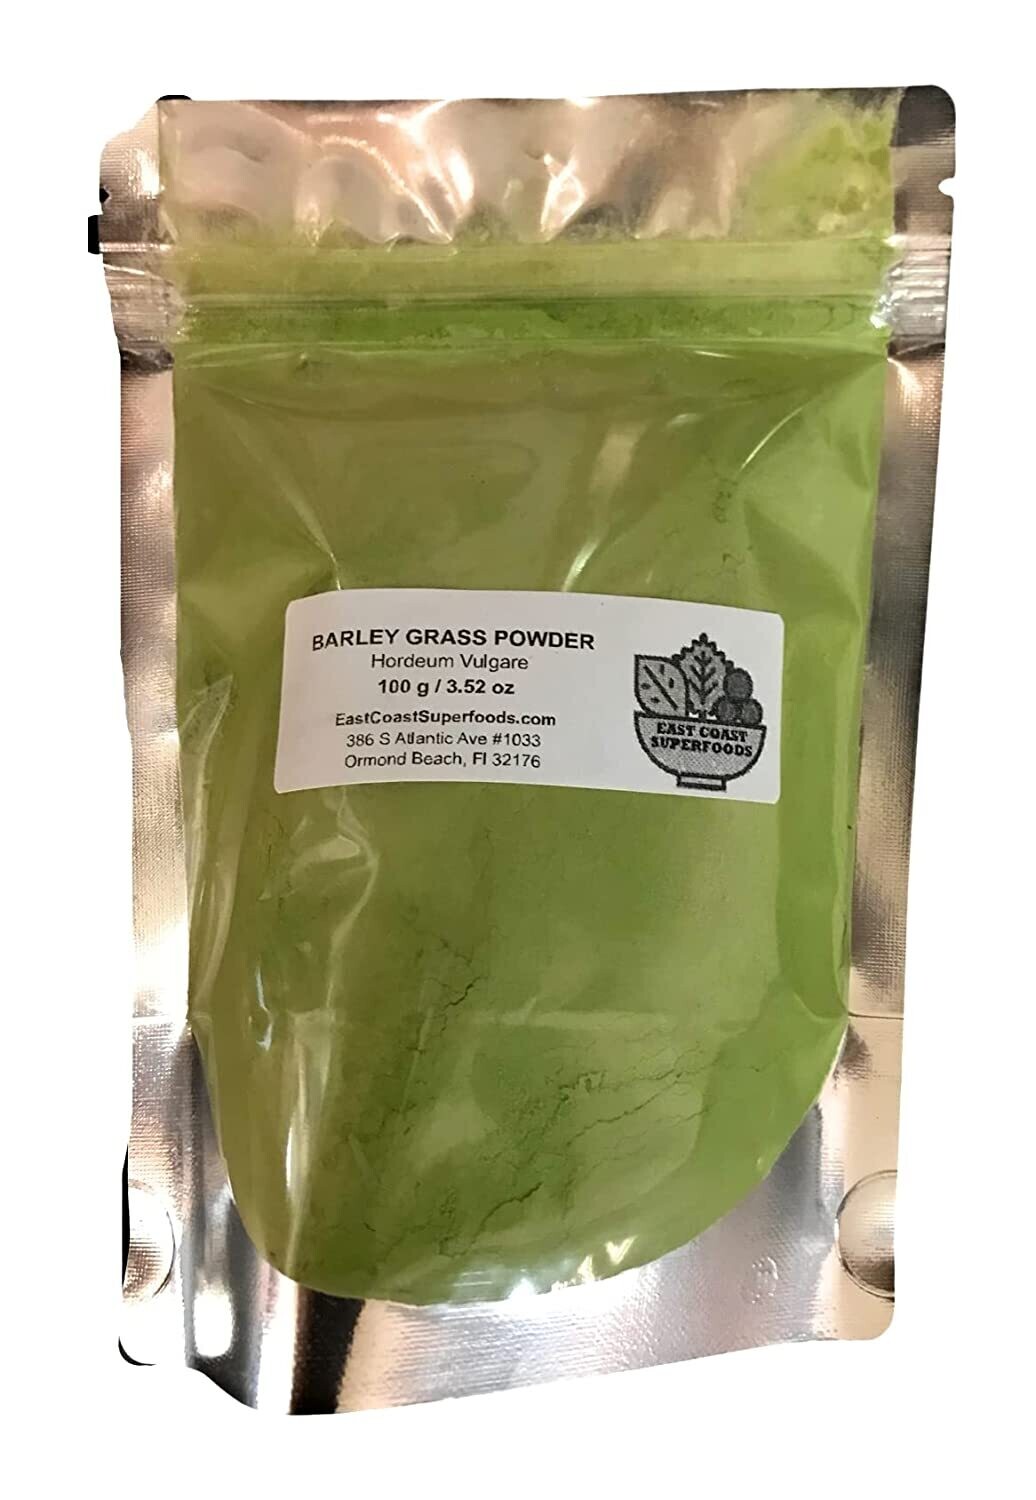 Barley Grass Powder from East Coast Superfoods 100 g / 3.52 oz